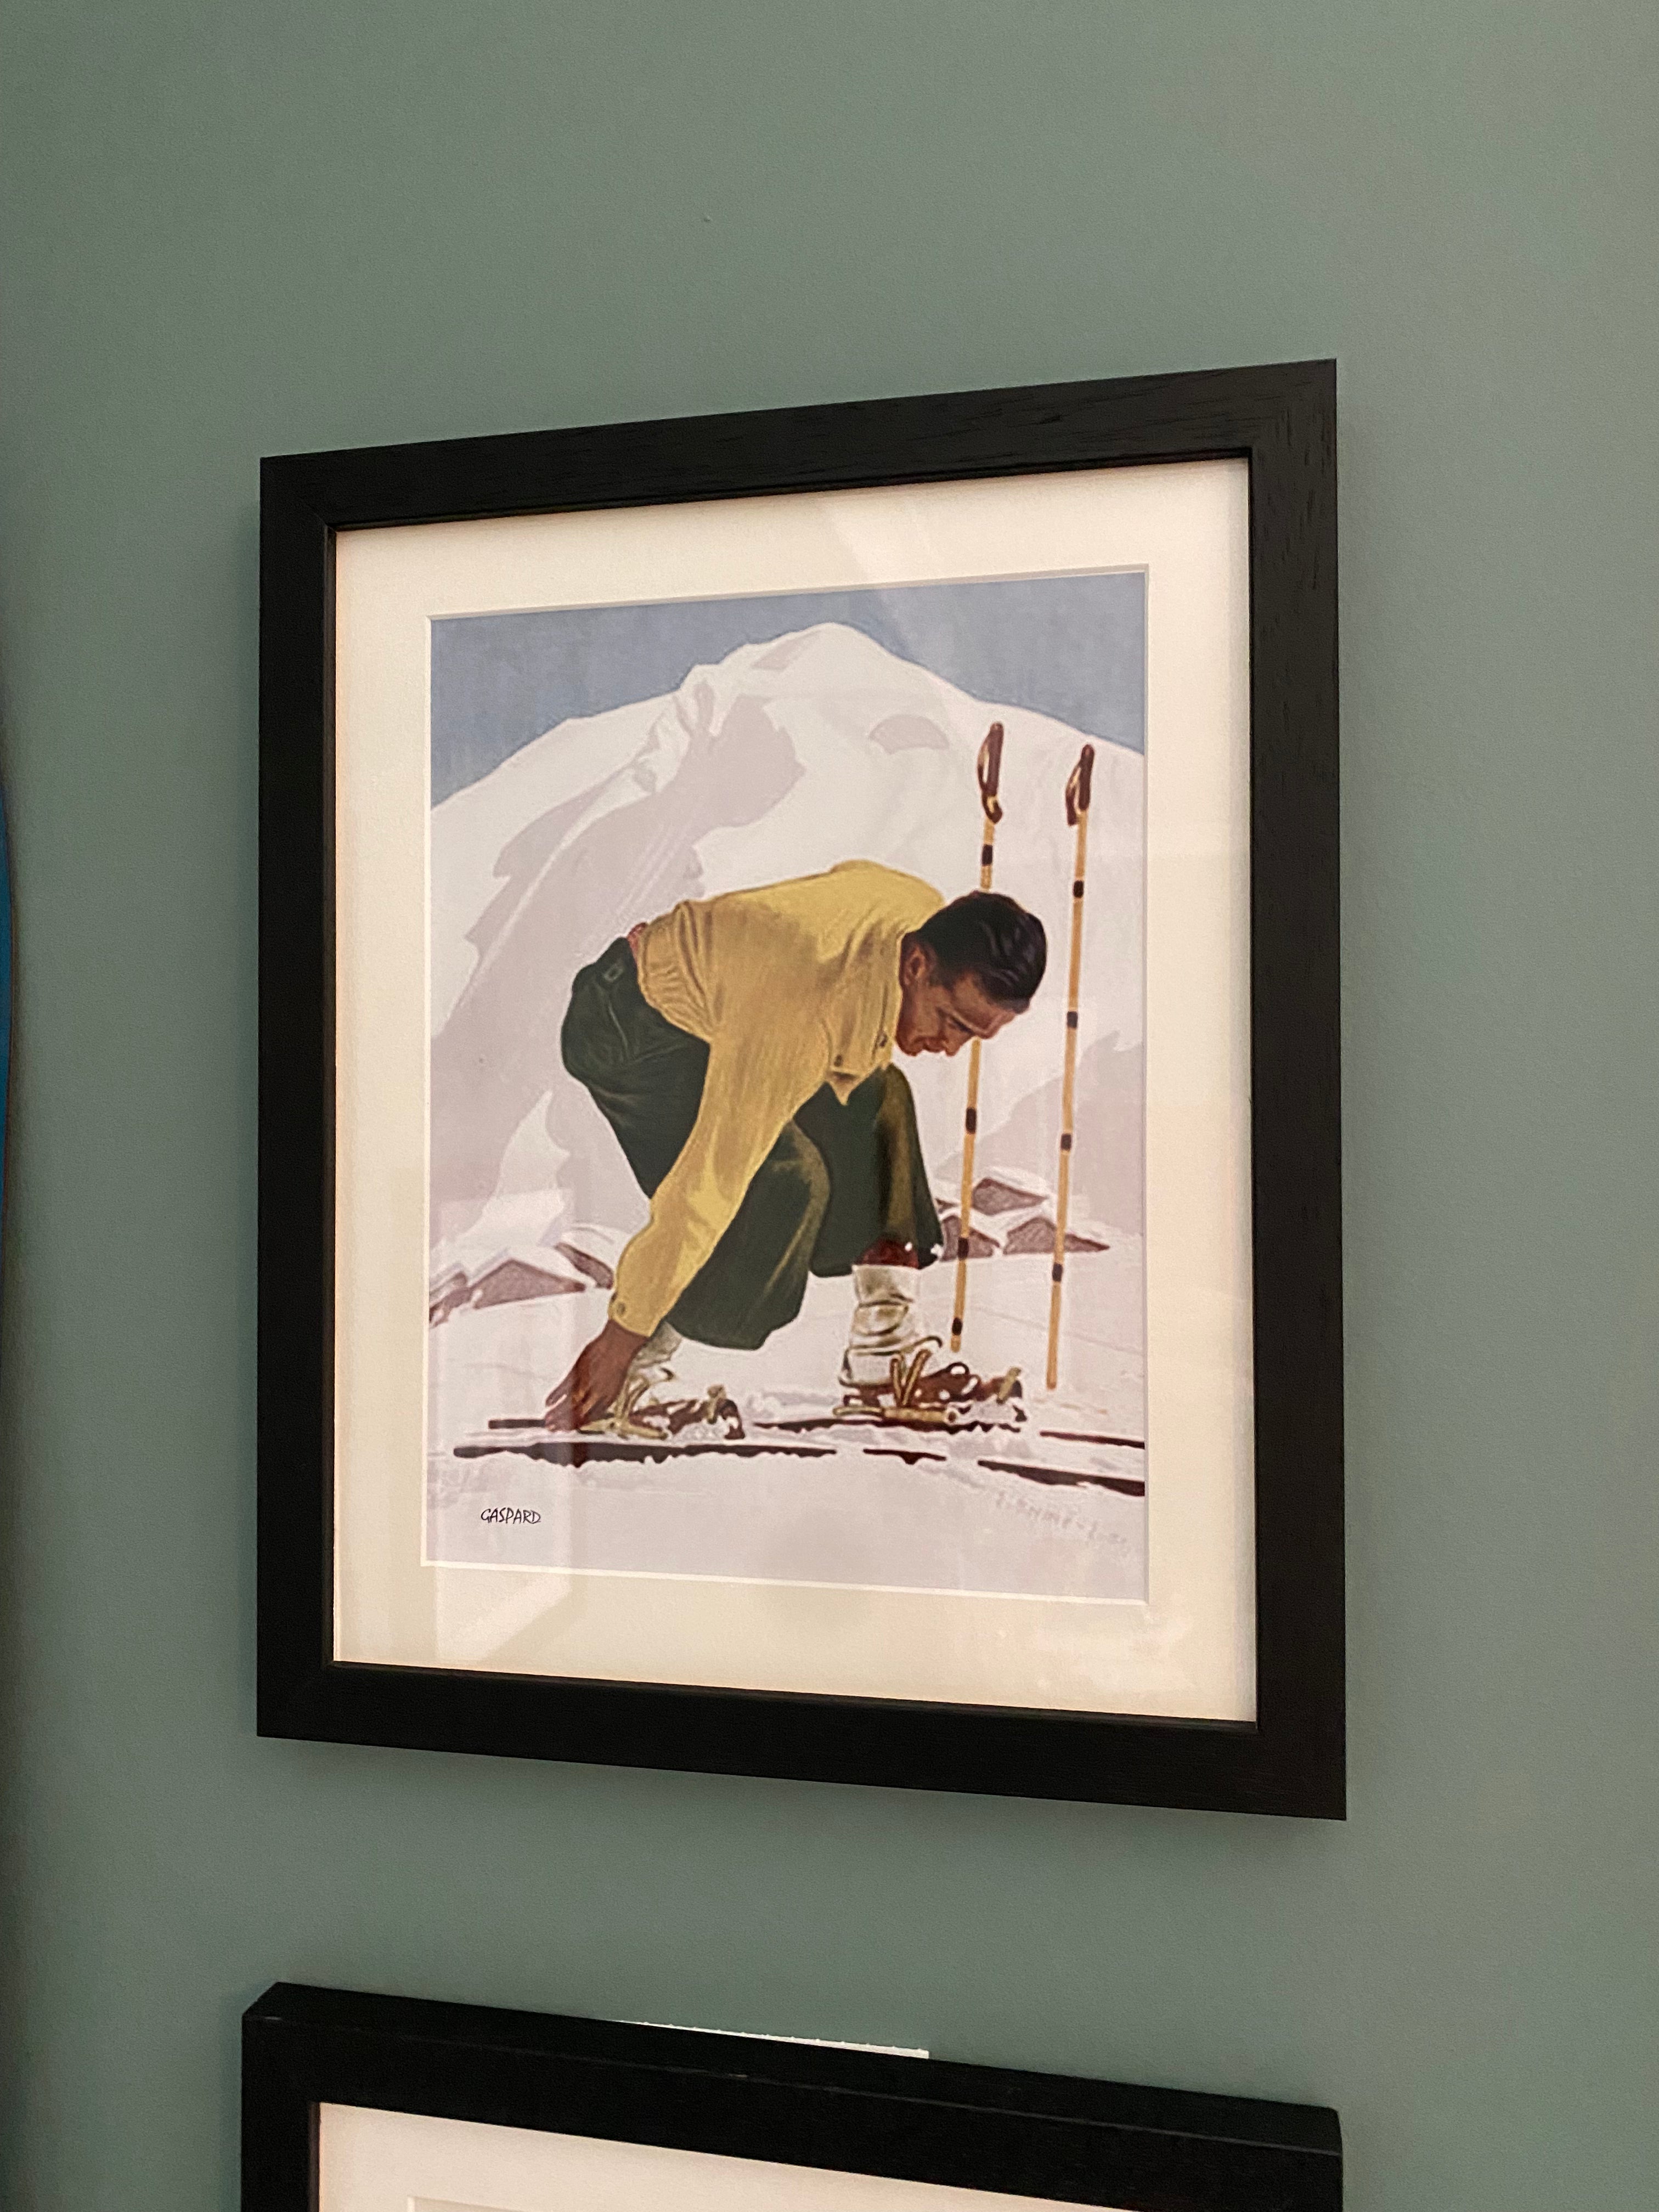 Black framed picture of a man in a yellow jumper & green ski pants leaning down to click into his wooden skis, with a white mountain & blue sky in the background, hanging on a green wall.